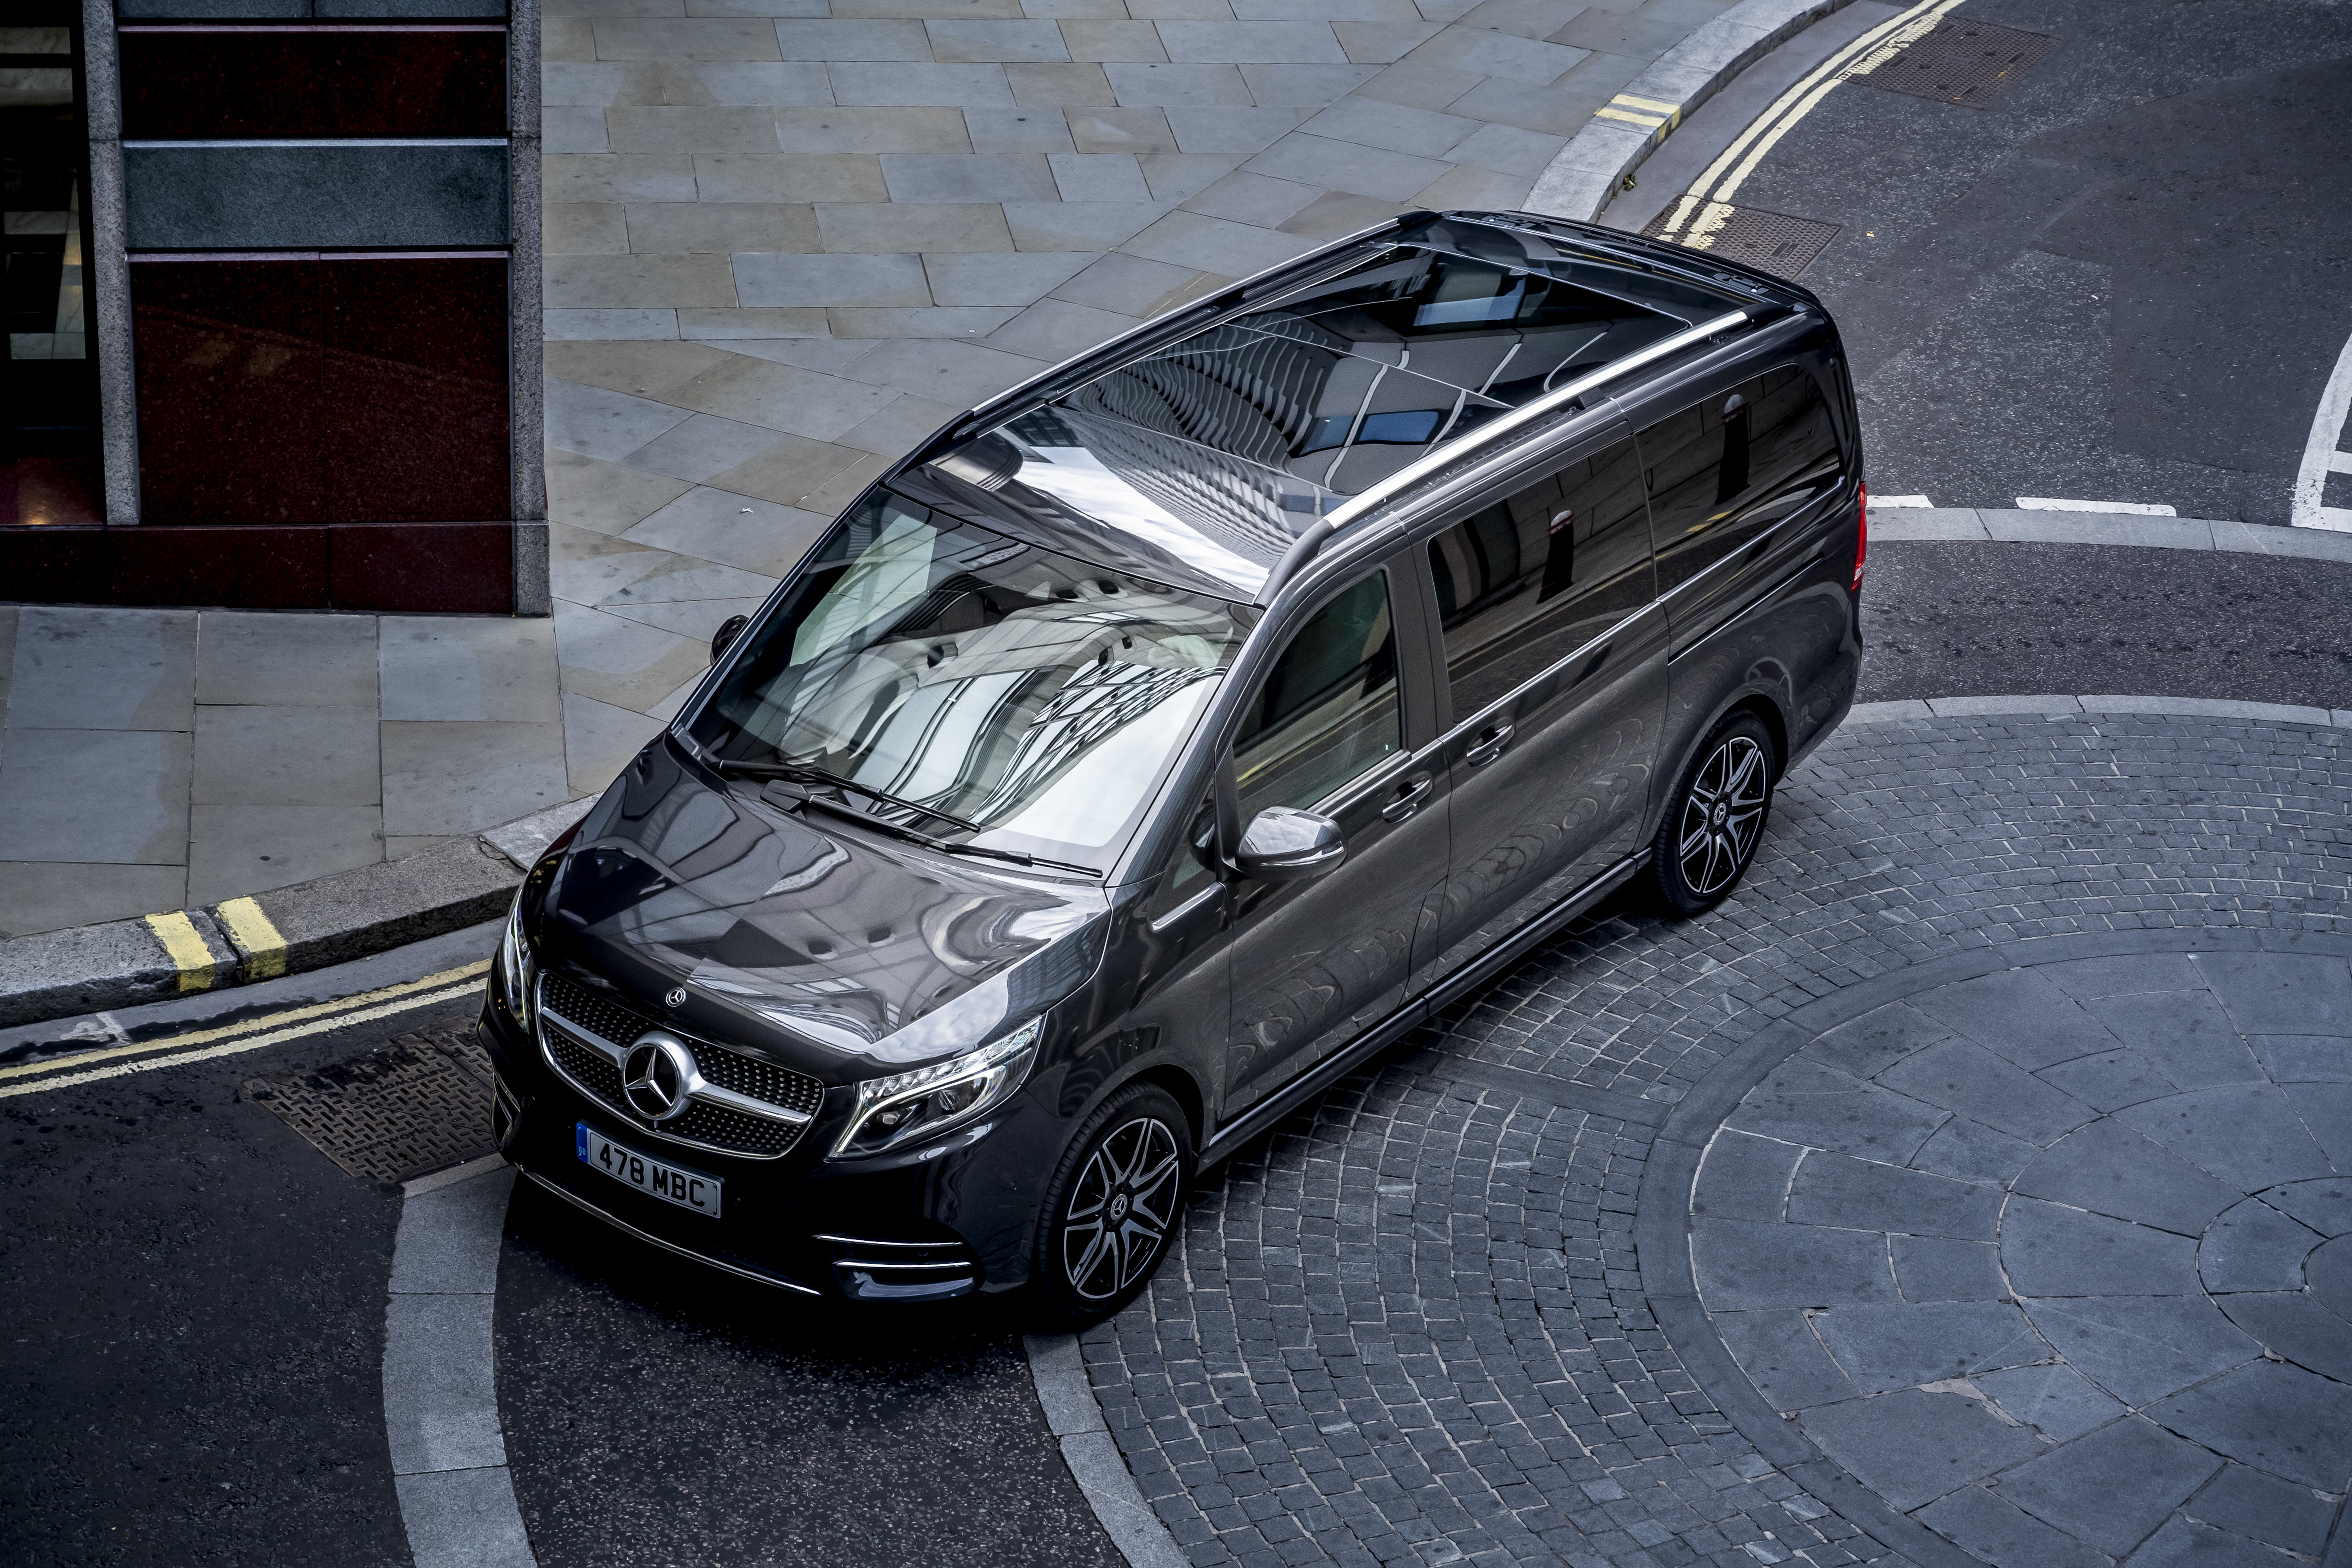 The V-Class has a huge wheelbase which helps interior space